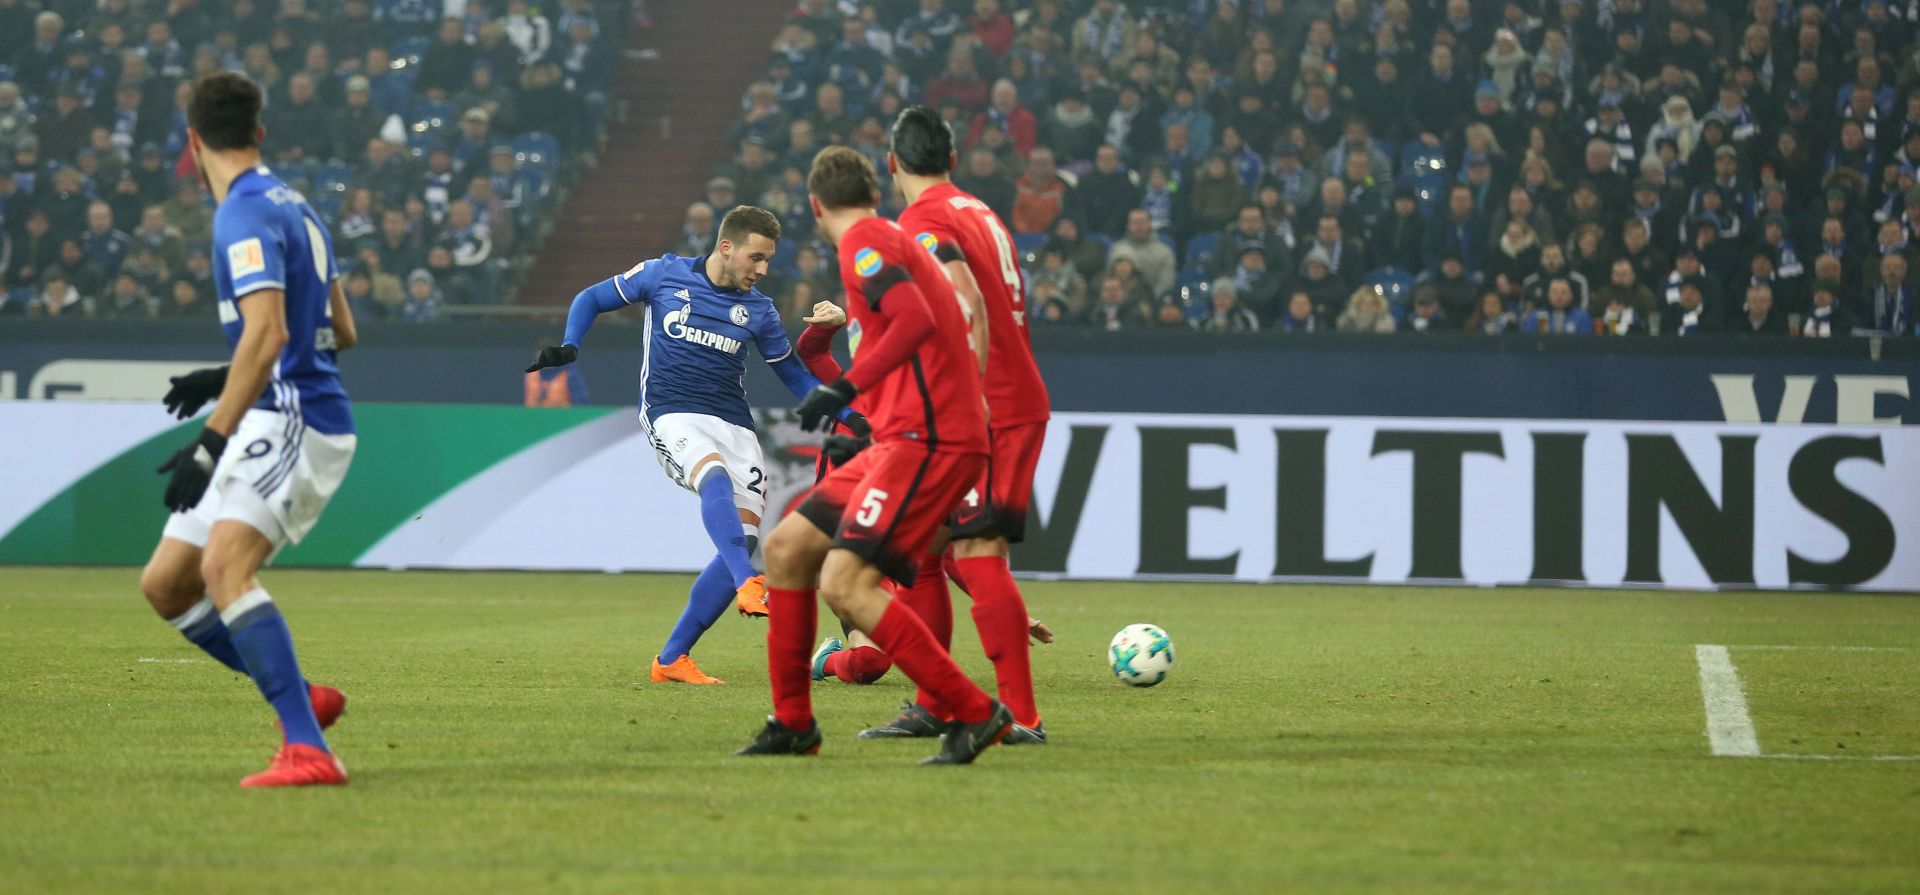 dpatop - Schalke's Marko Pjaca (2-L) scores his side's 1st goal during the German Bundesliga soccer match between FC Schalke 04 and Hertha BSC at the Veltins-Arena in Gelsenkirchen, Germany, 03 March 2018. Photo: Ina Fassbender/dpa - Use only with the written agreement